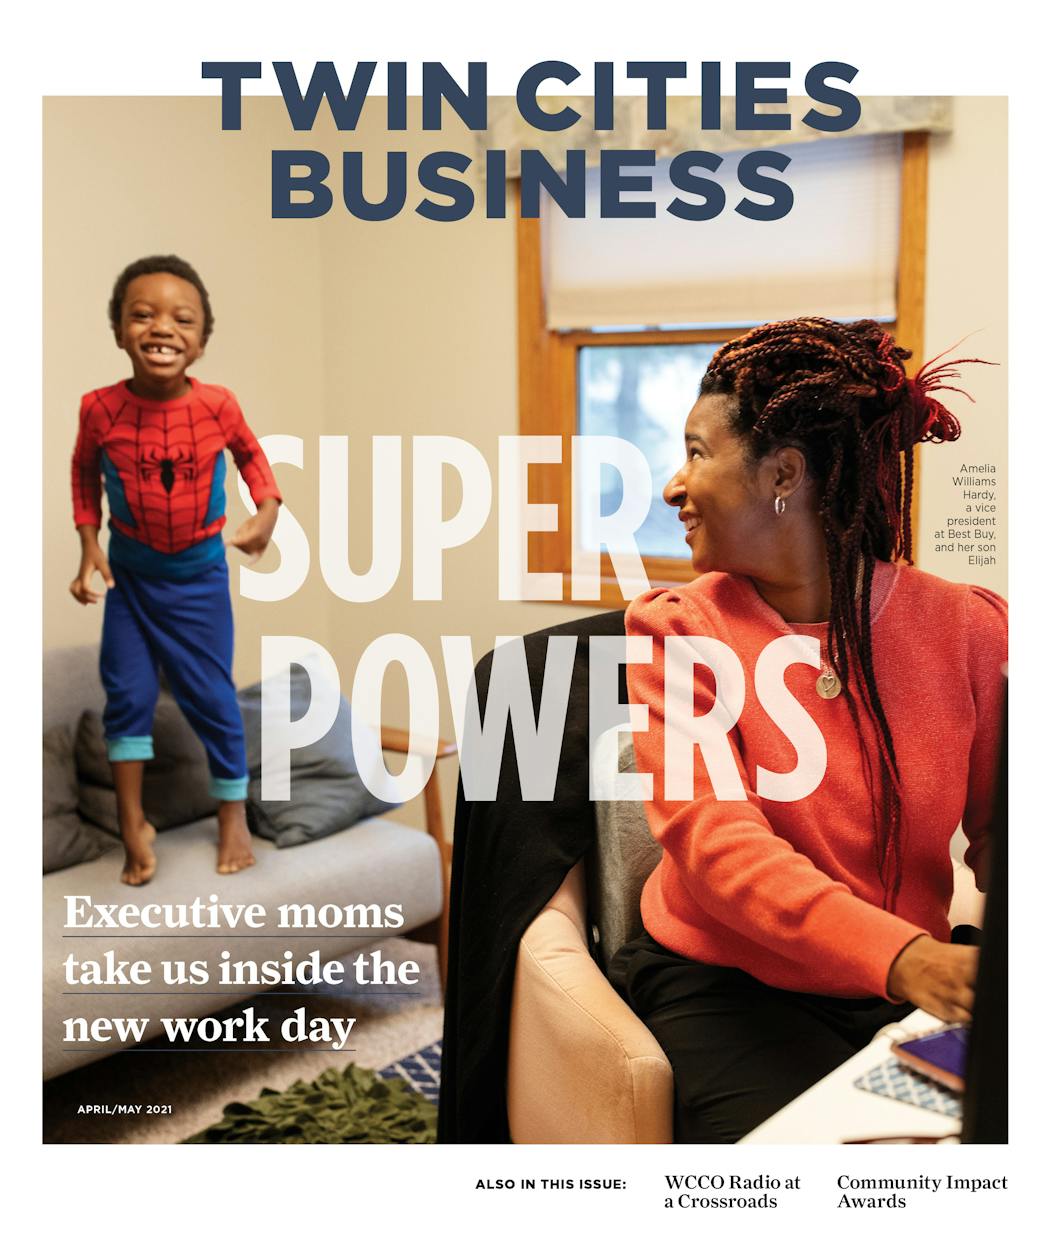 Leading Twin Cities Business, Kaplan has broadened coverage to reach an audience that’s younger, more female, and more diverse.